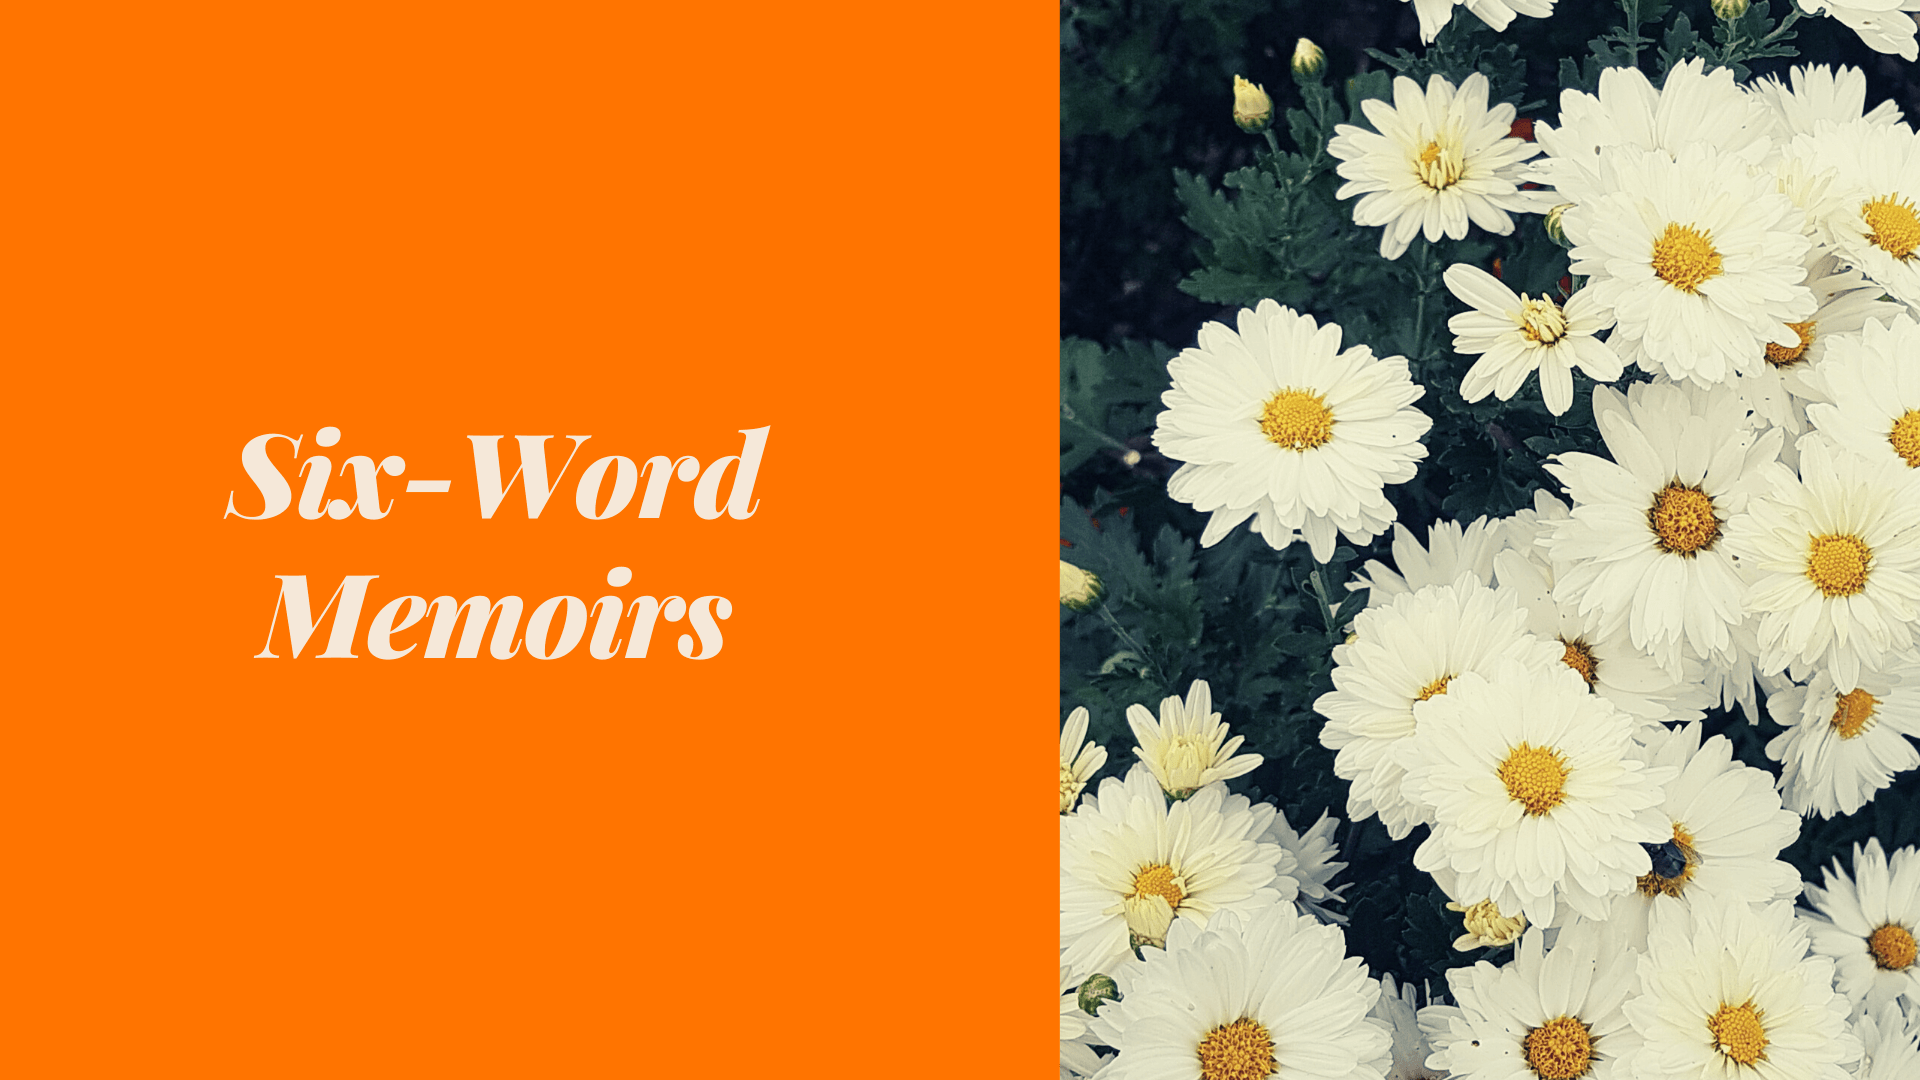 Six-Word Memoirs appears next to flowers